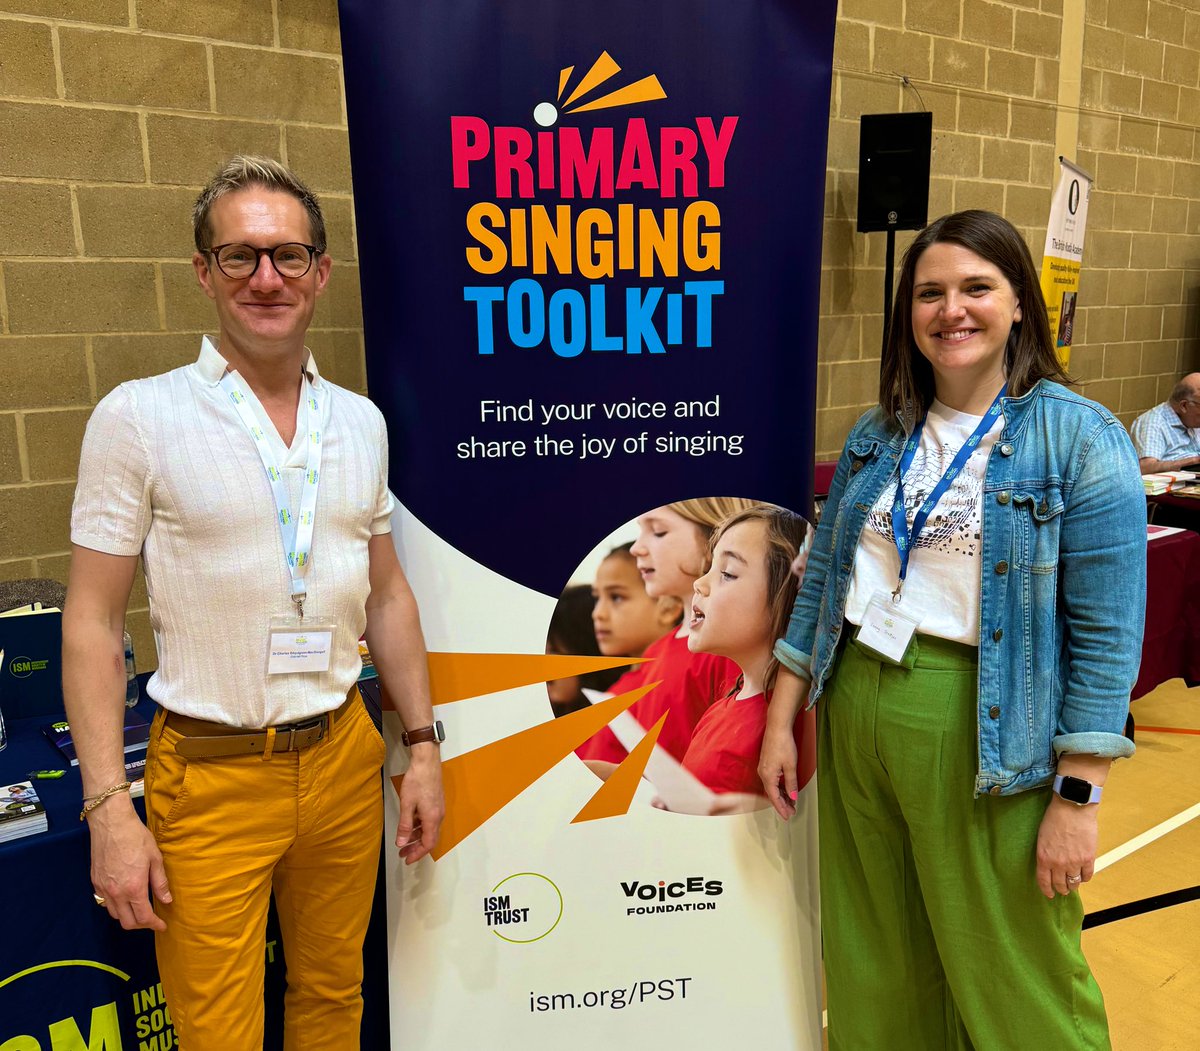 Thanks to everyone who attended our #PrimarySingingToolkit session with @CBeqMacD and @JennyTrattles at the MTA Conference today 🎶🙌 @MusicTeachers_ Feel empowered to share the joy of singing with your students 👉 ism.org/PST